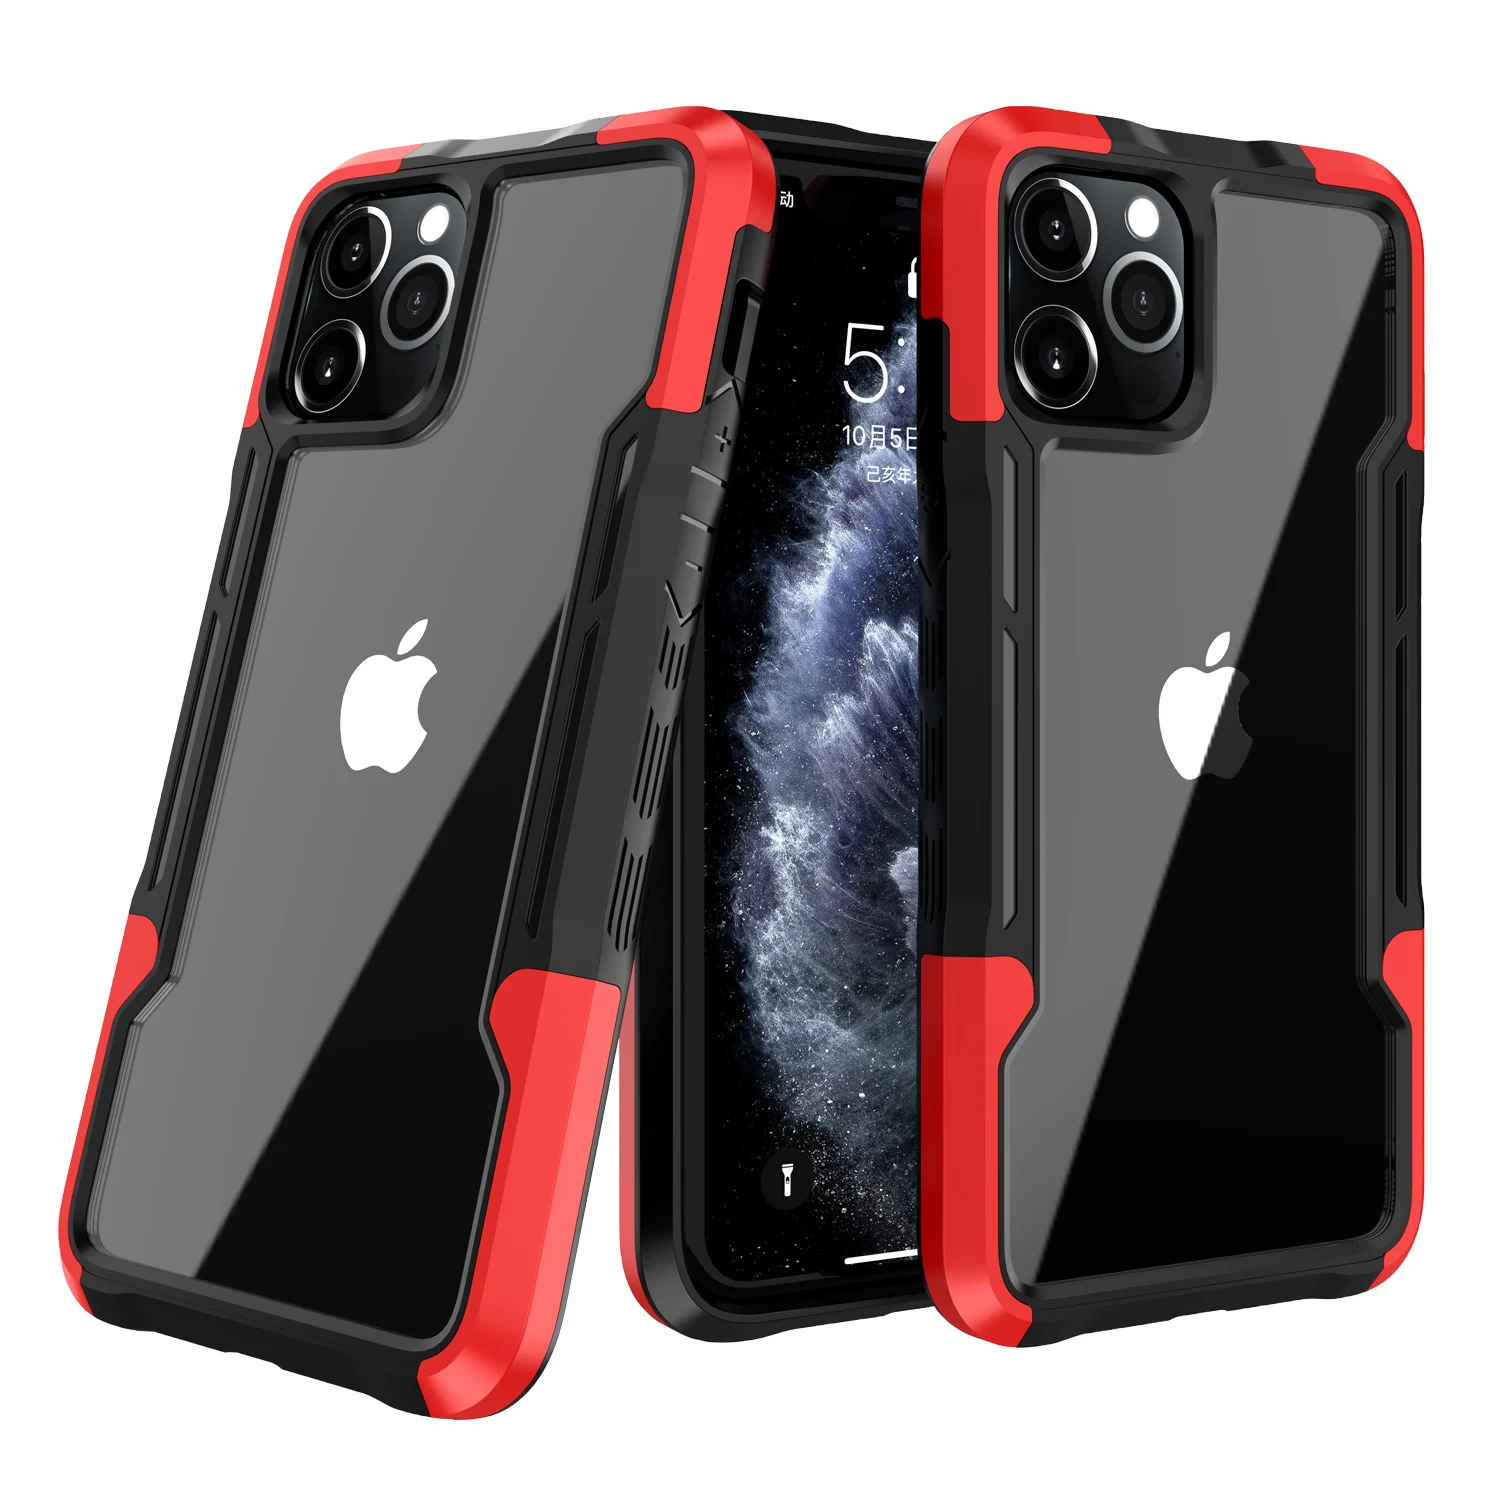 apple iphone 13 mini case leather Shockproof Rugged Tough Impact TPU Soft Phone Case For iphone 13 11 Pro Max XS Max XR X 7 8 Plus 12Mini Dual Protect Clear Cover case iphone 13 mini iPhone 13 Mini